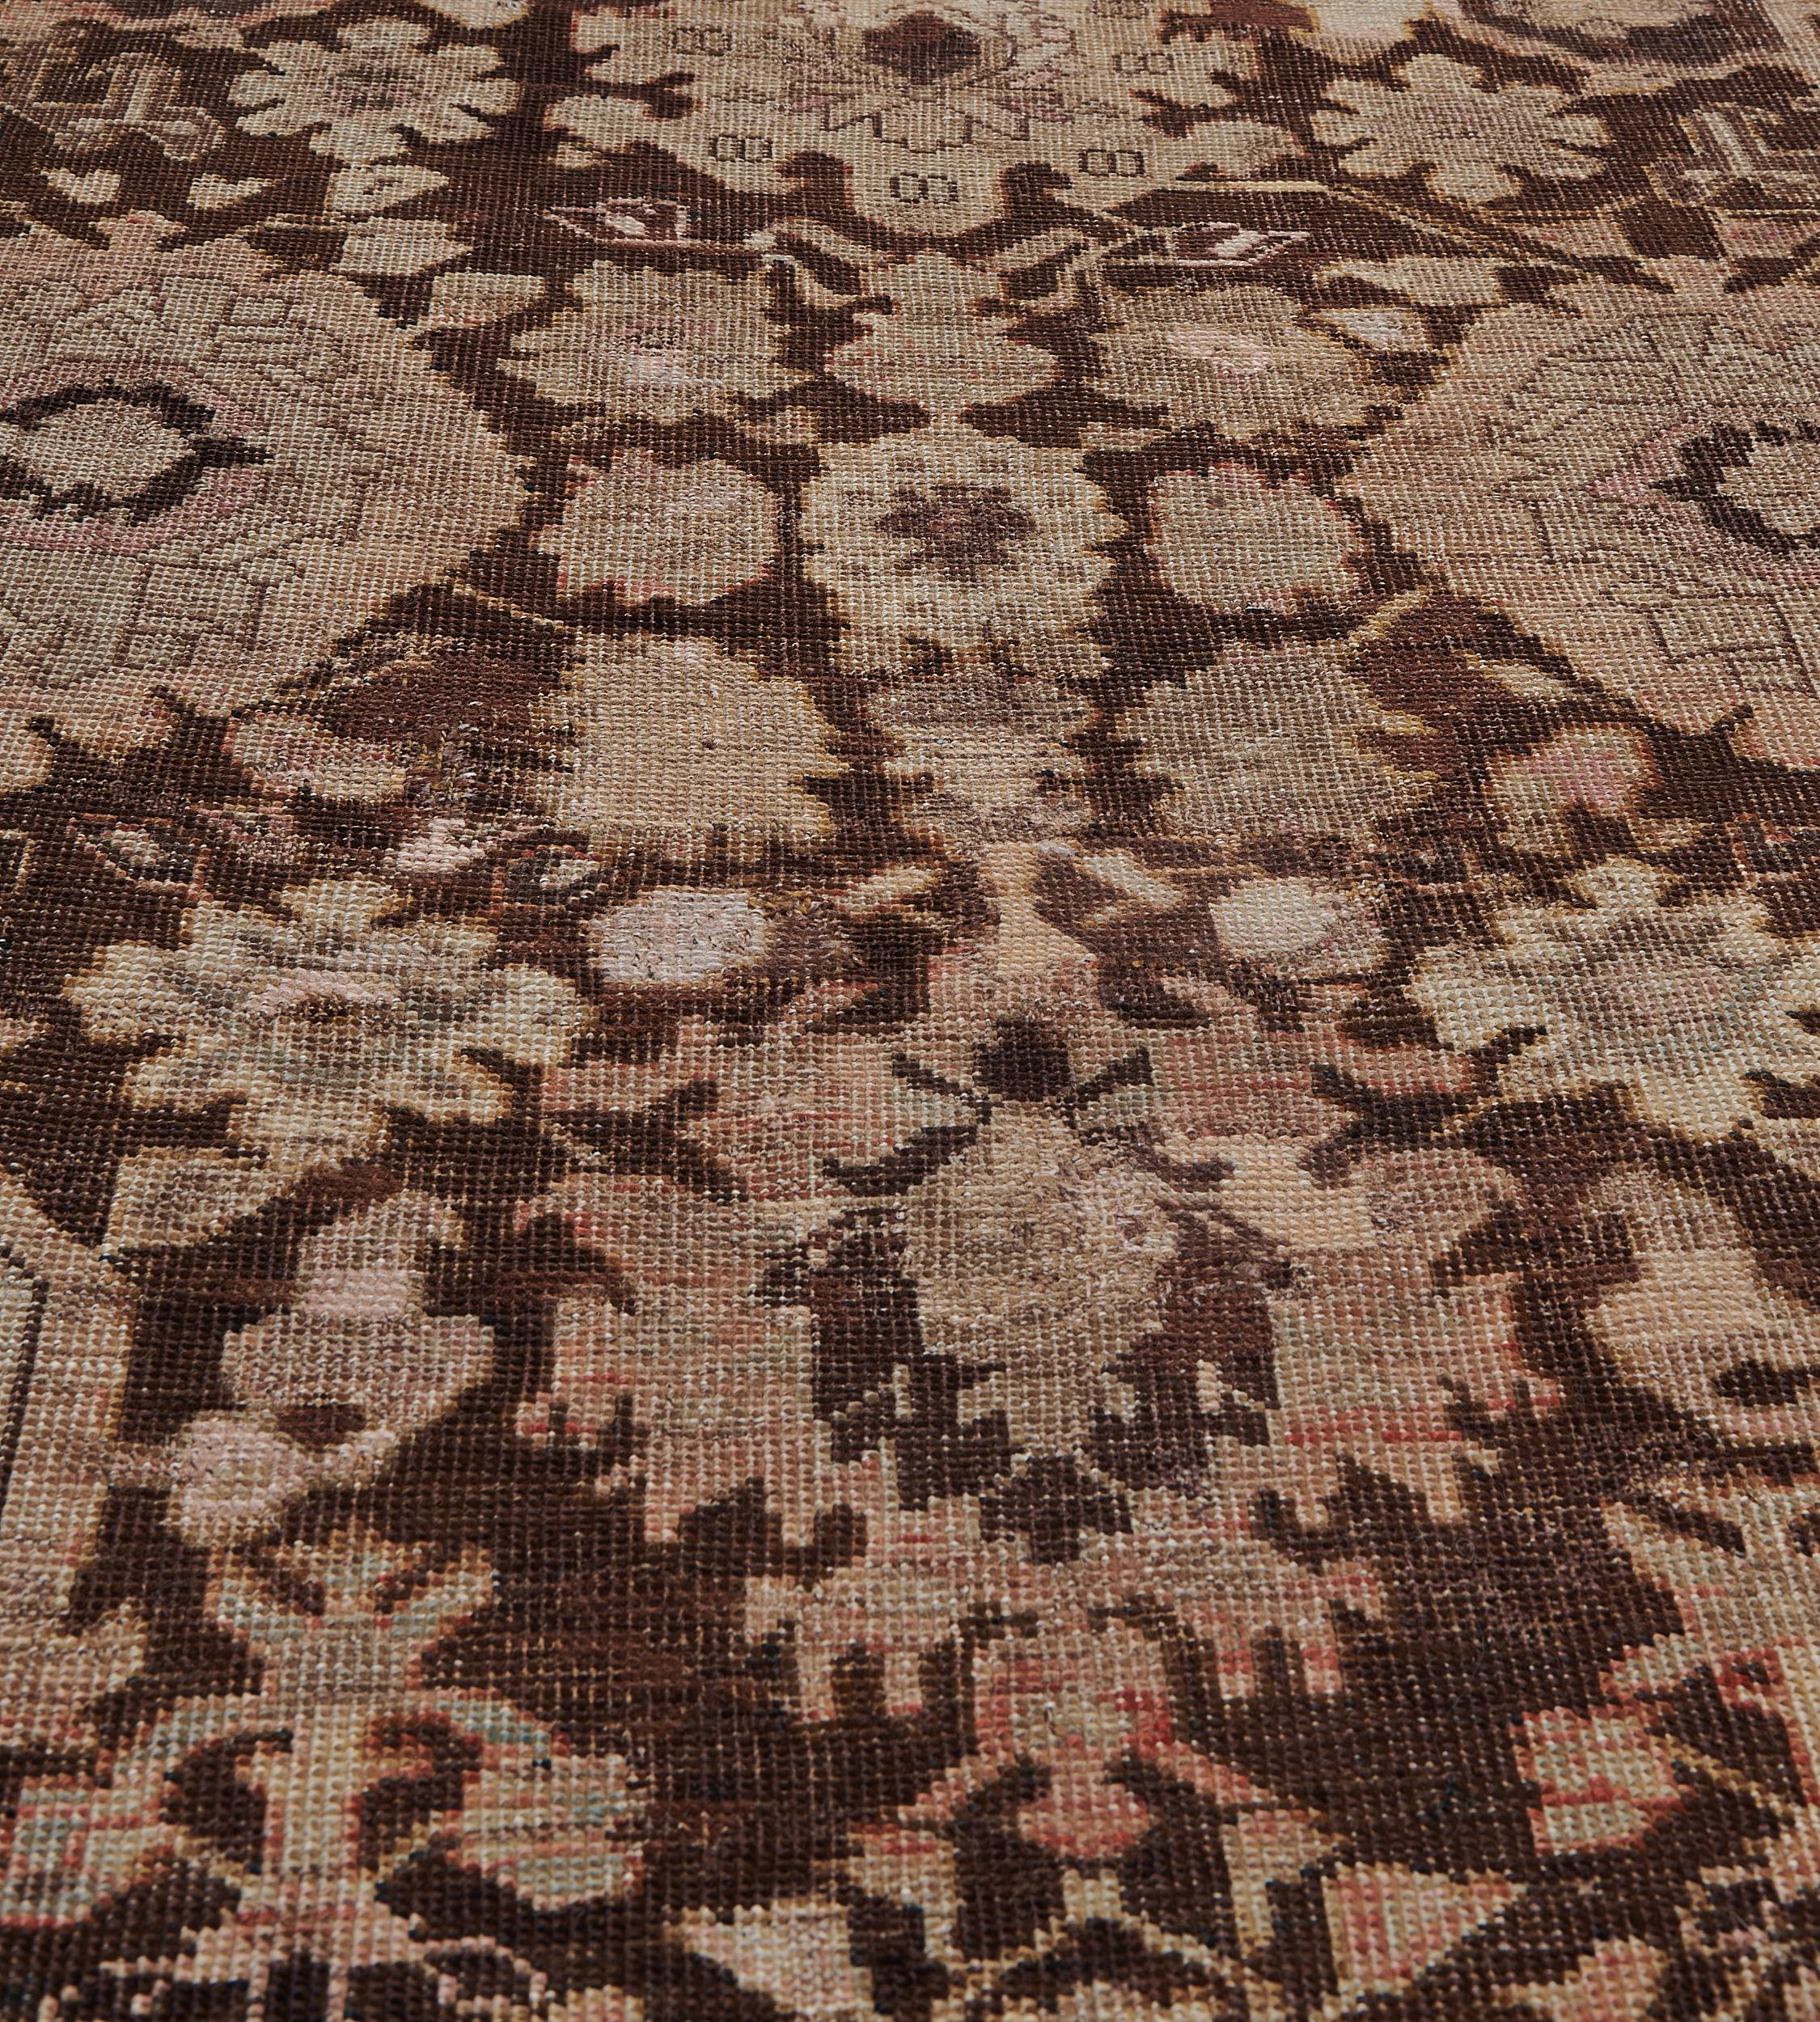 Chocolate-Brown Traditional Handwoven Wool Persian Karabagh Runner In Good Condition For Sale In West Hollywood, CA